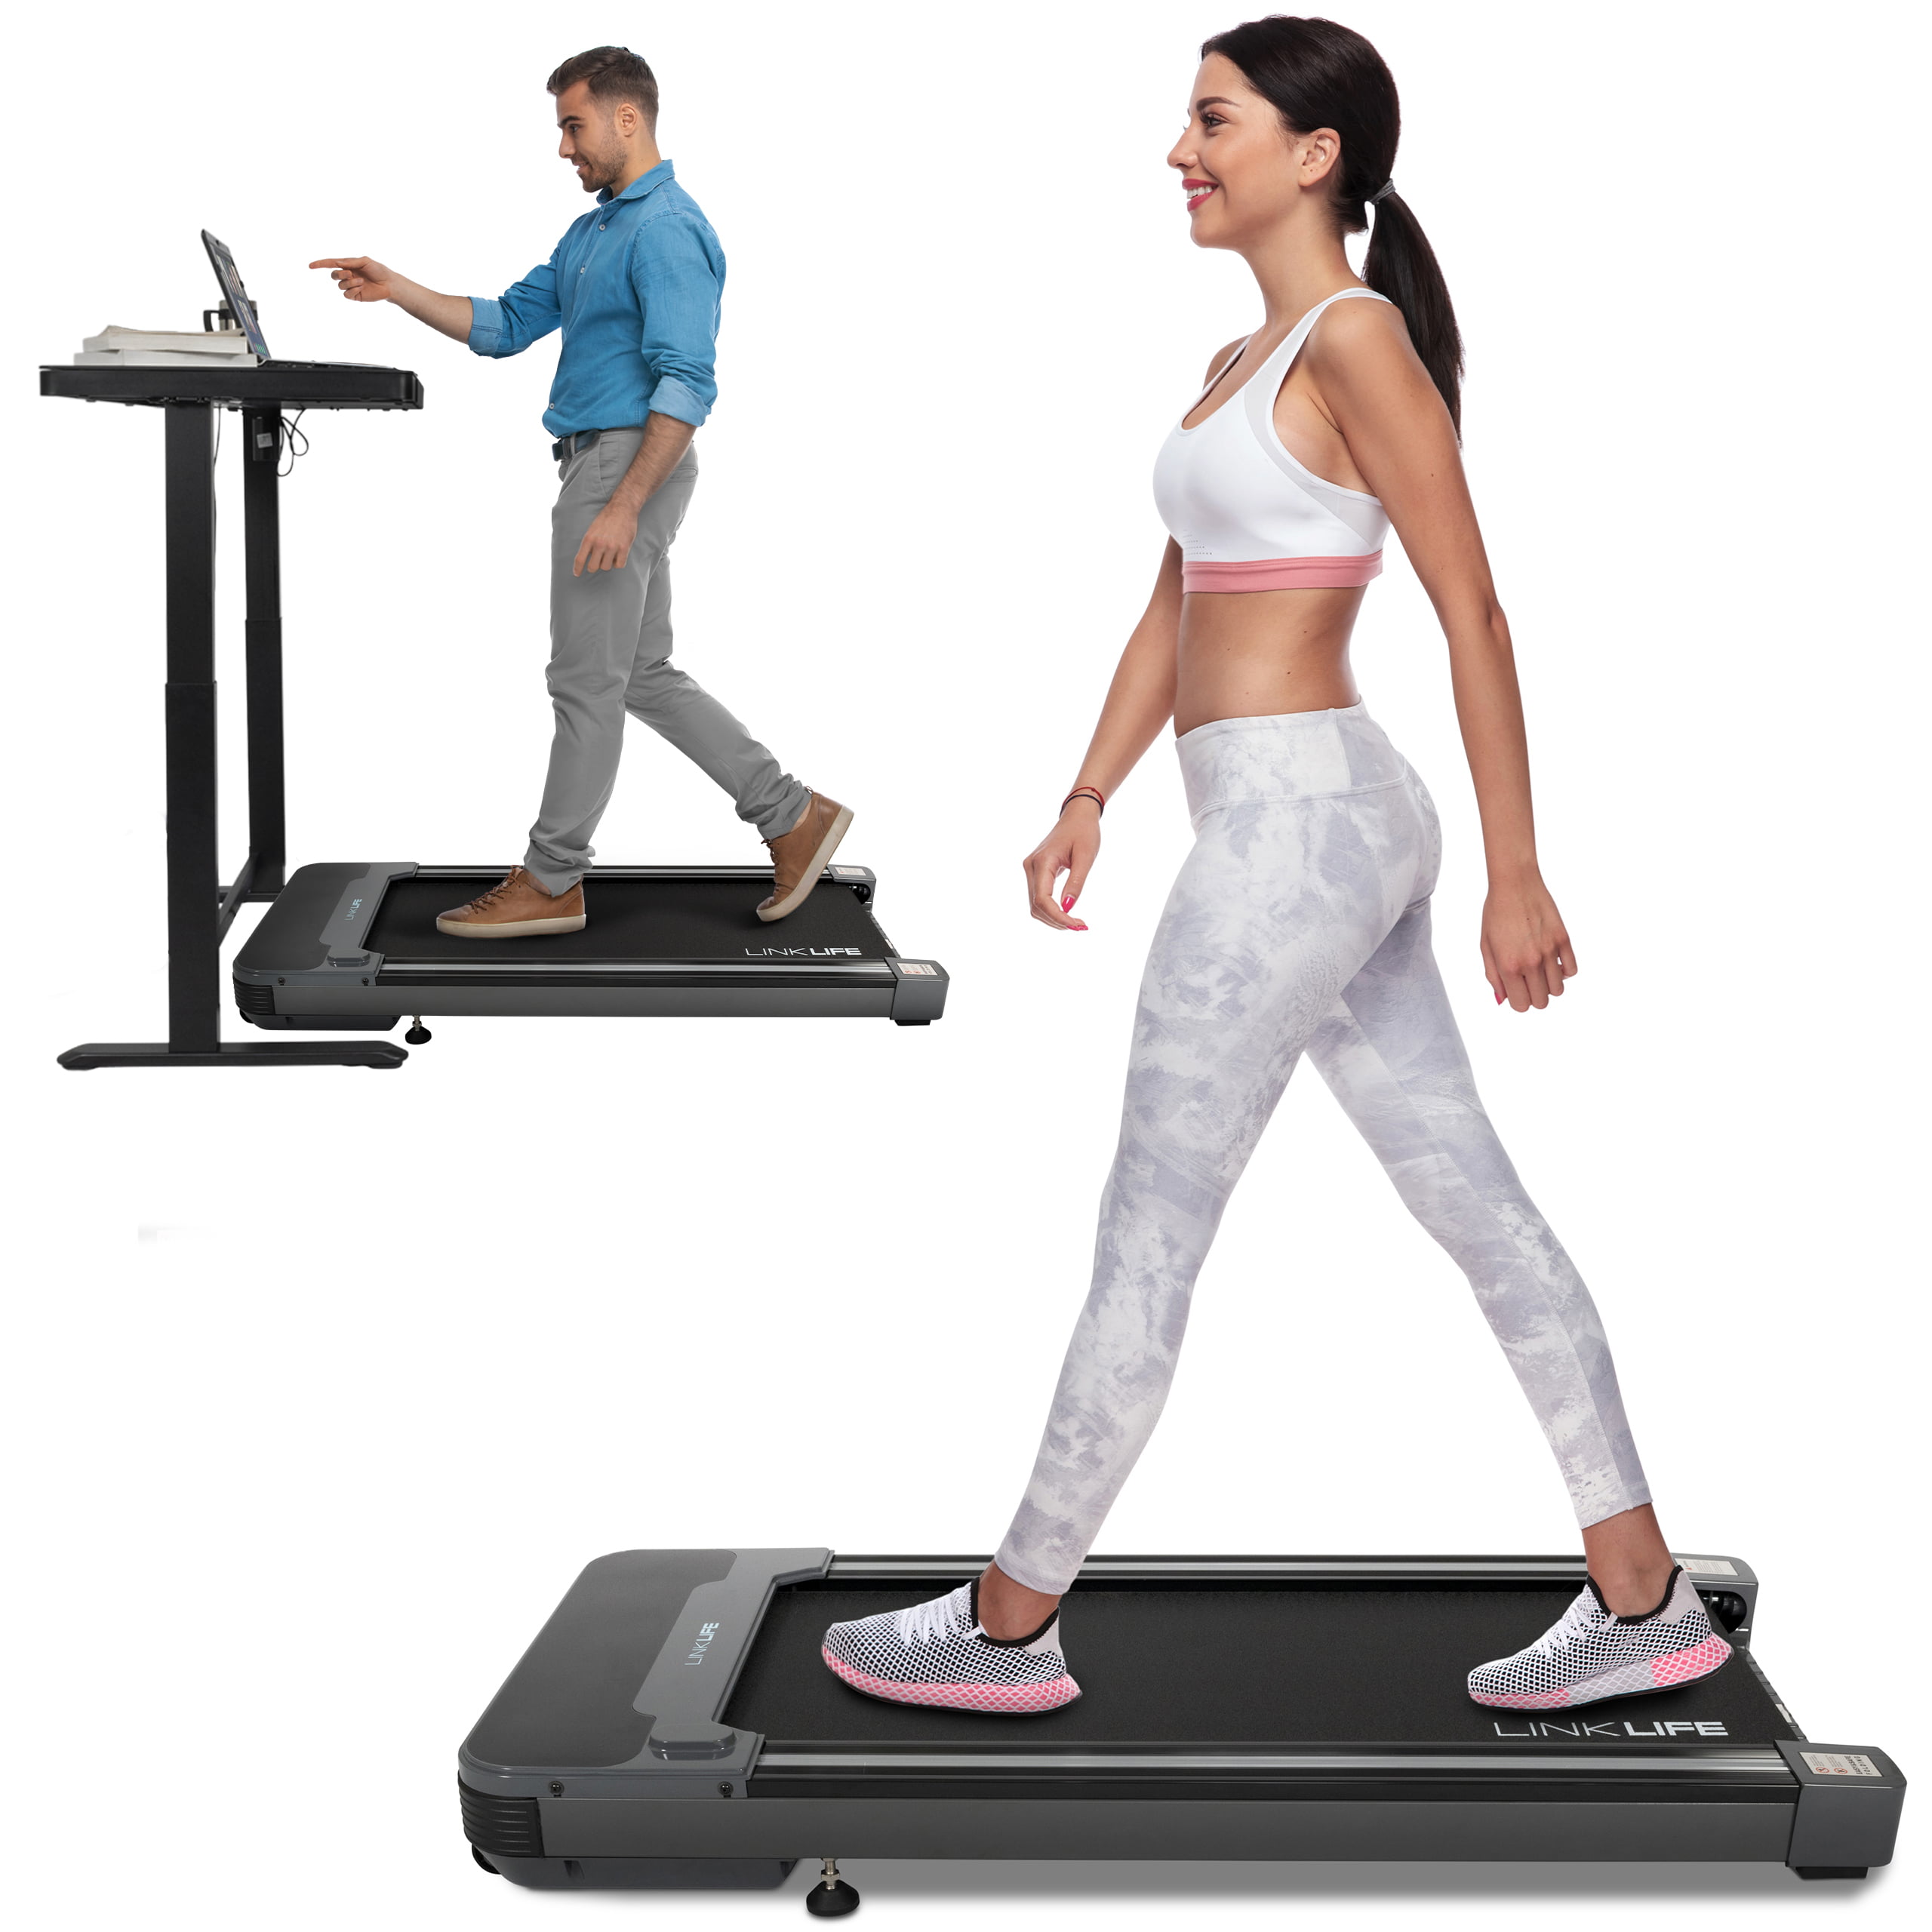 Exercise Fitness Machine for Home/Office Use DKLGG Folding Electric Treadmill Portable Household Treadmill with Remote Control and Bluetooth Speaker & LCD Monitor 